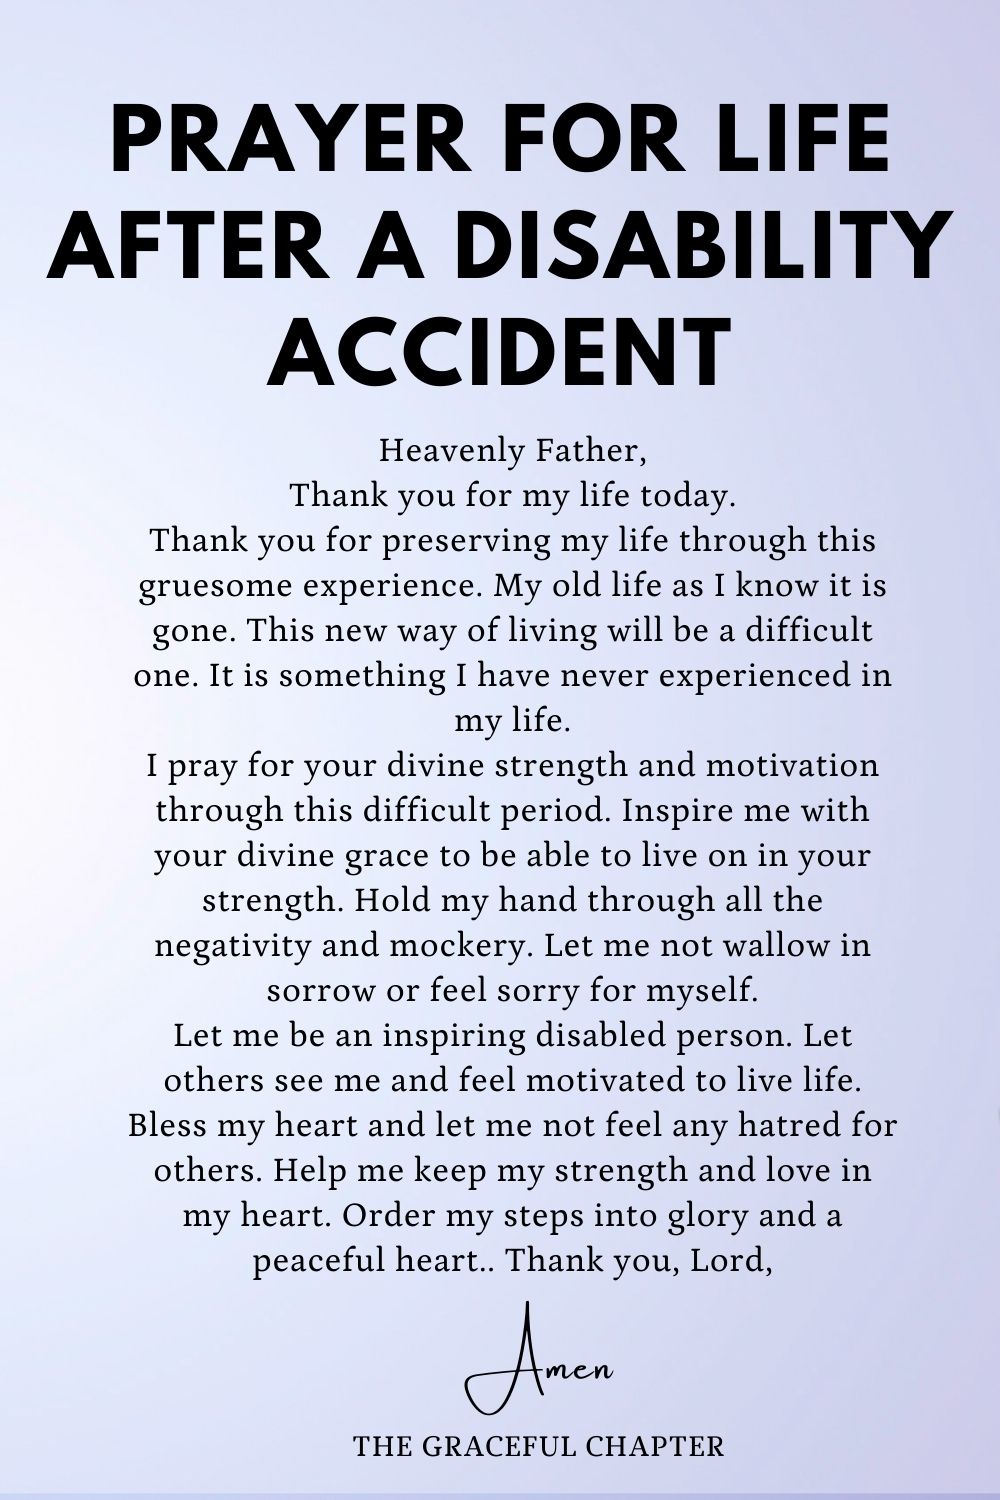 Prayer for life after a disability accident